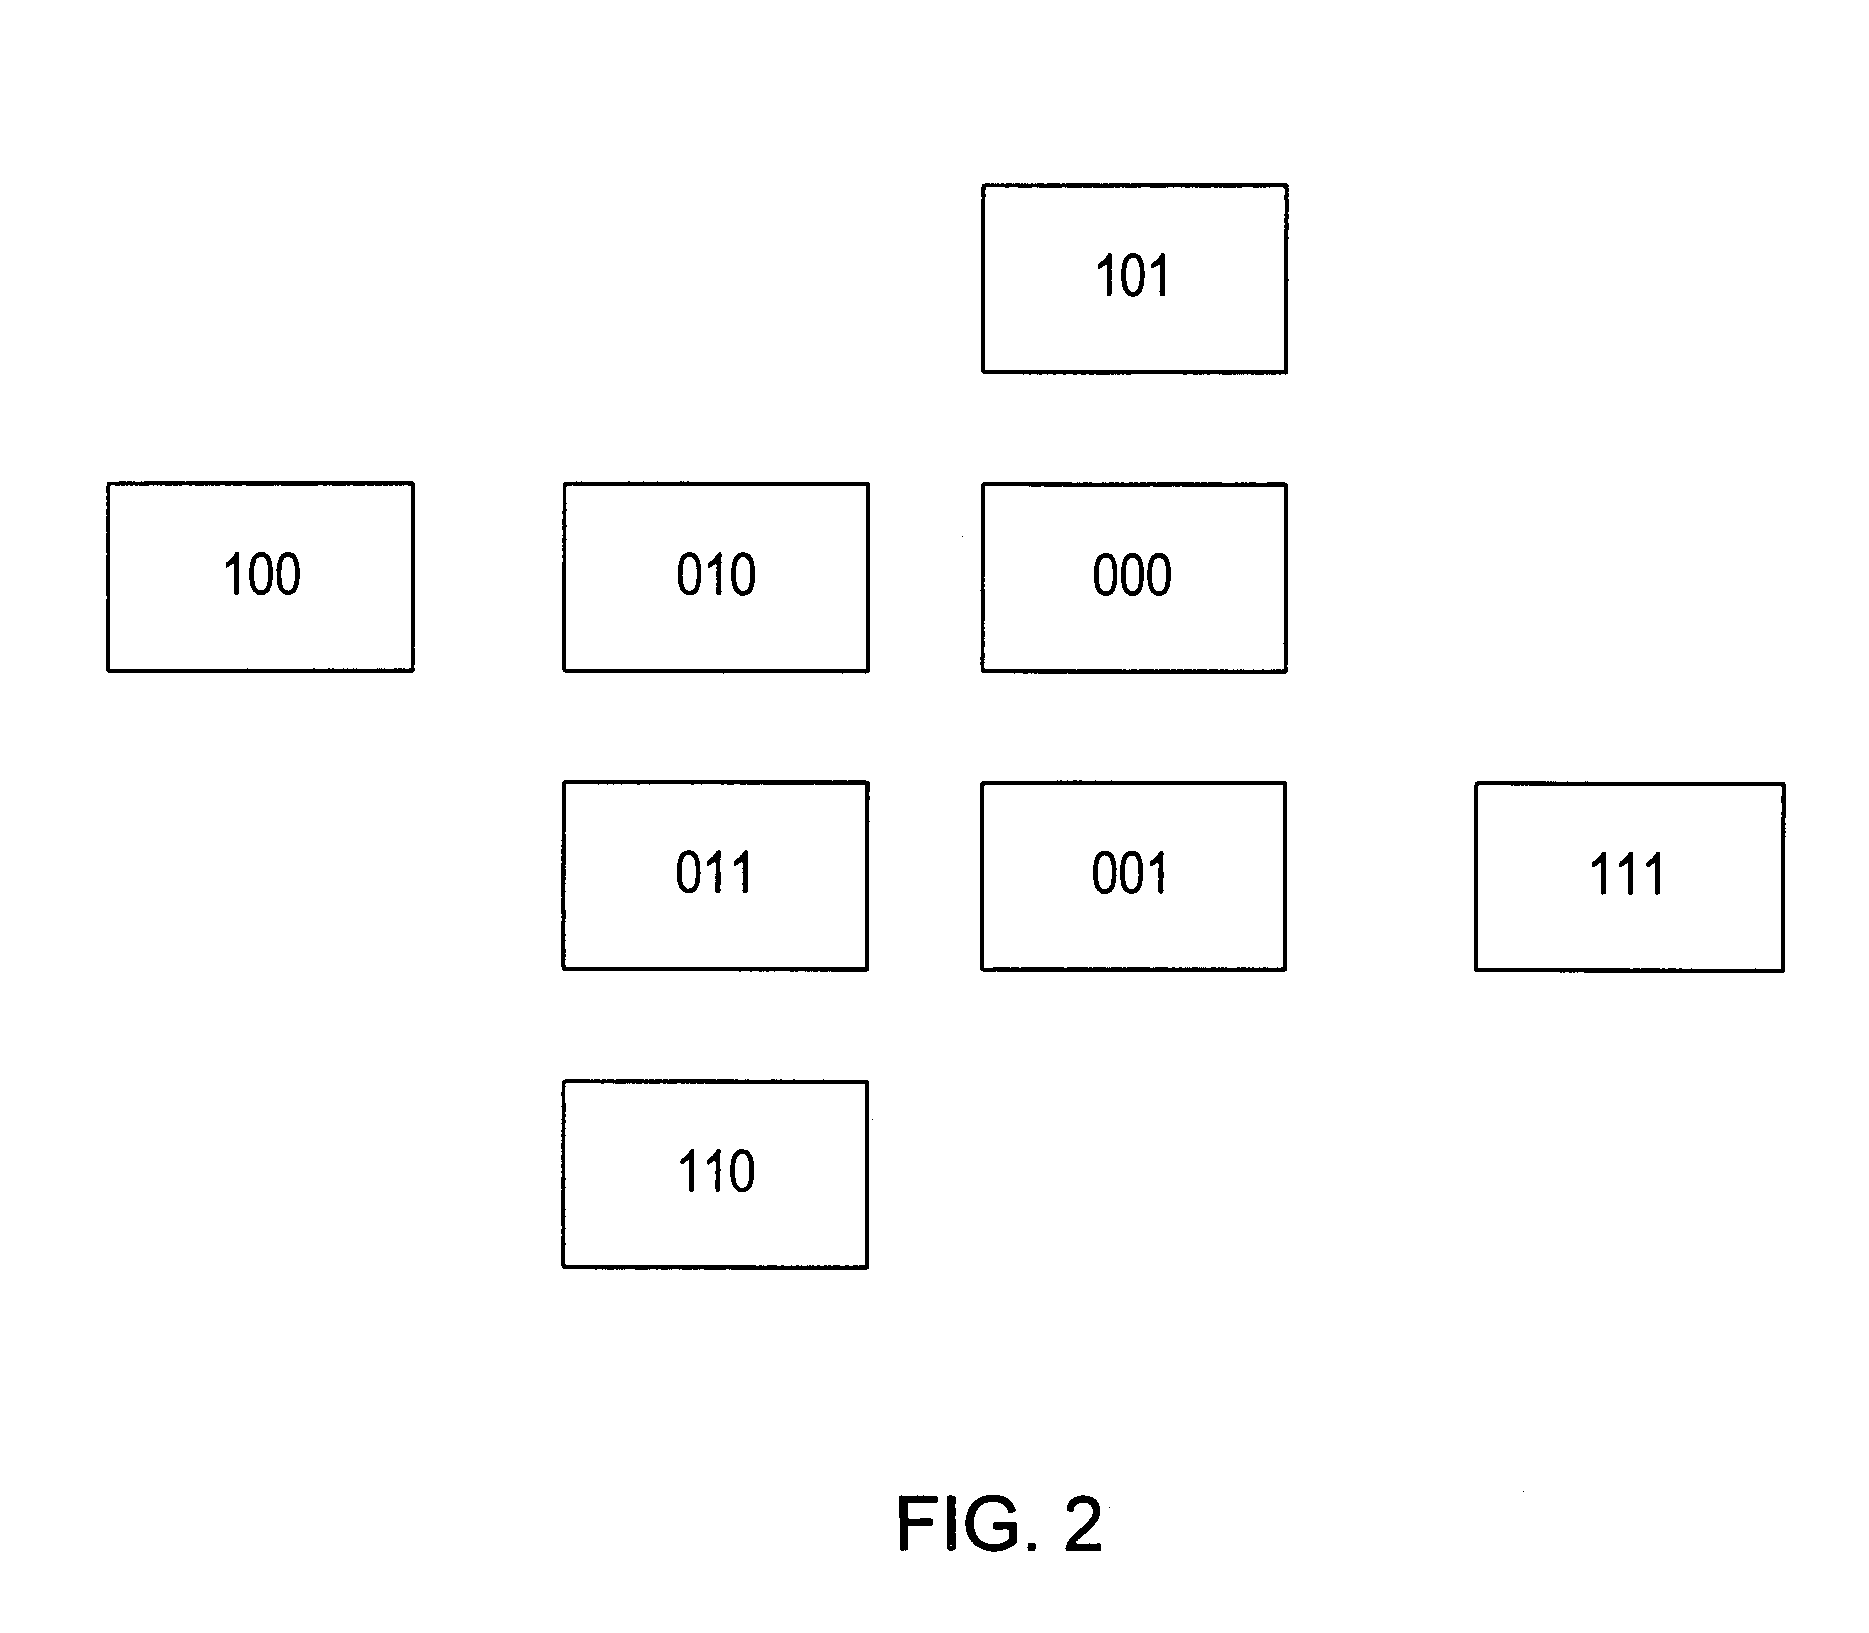 Performance evaluation of multicarrier channels